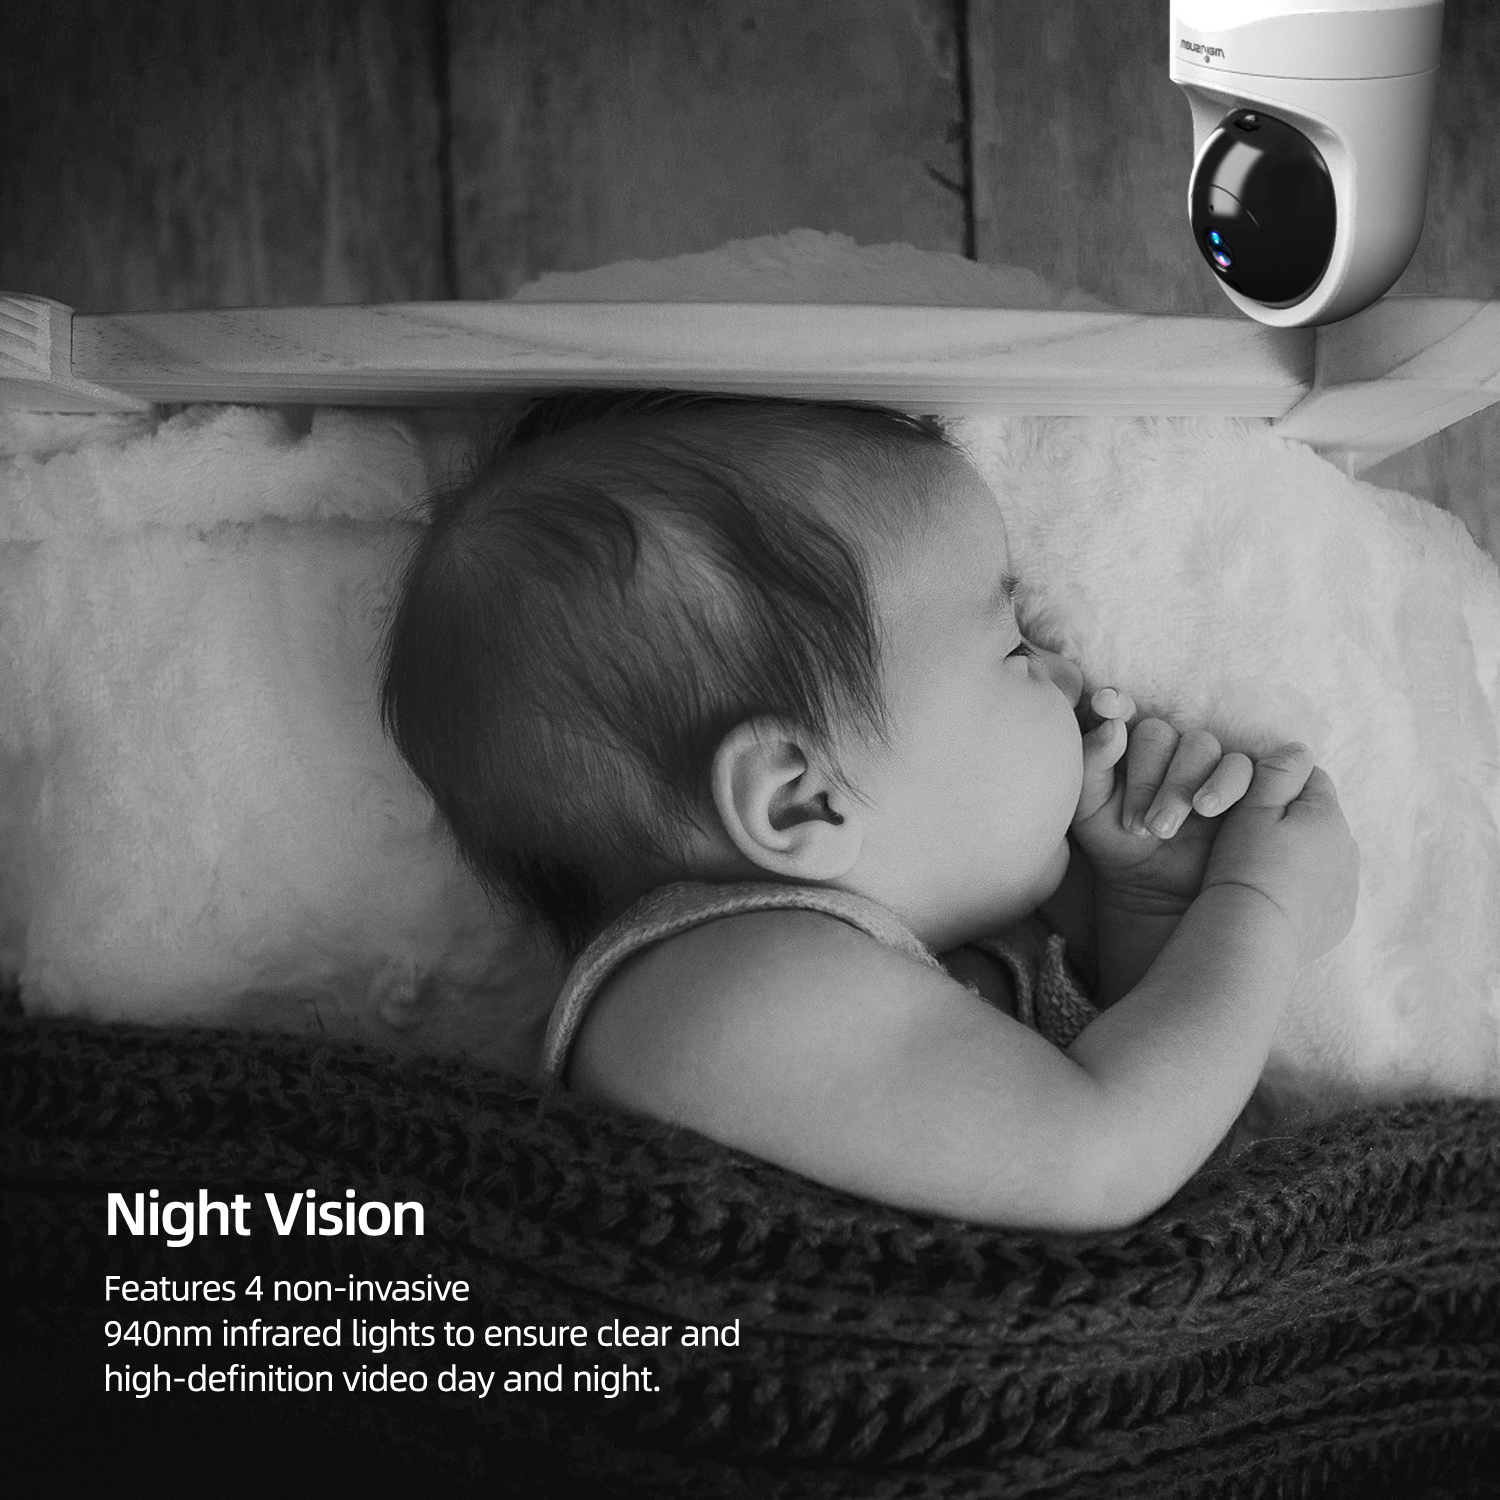 Wansview Wireless 1080P IP Camera, WiFi Home Security Surveillance Camera  for Baby/Elder/Pet/Nanny Monitor, Pan/Tilt, Two-Way Audio & Night Vision  Q3-S 